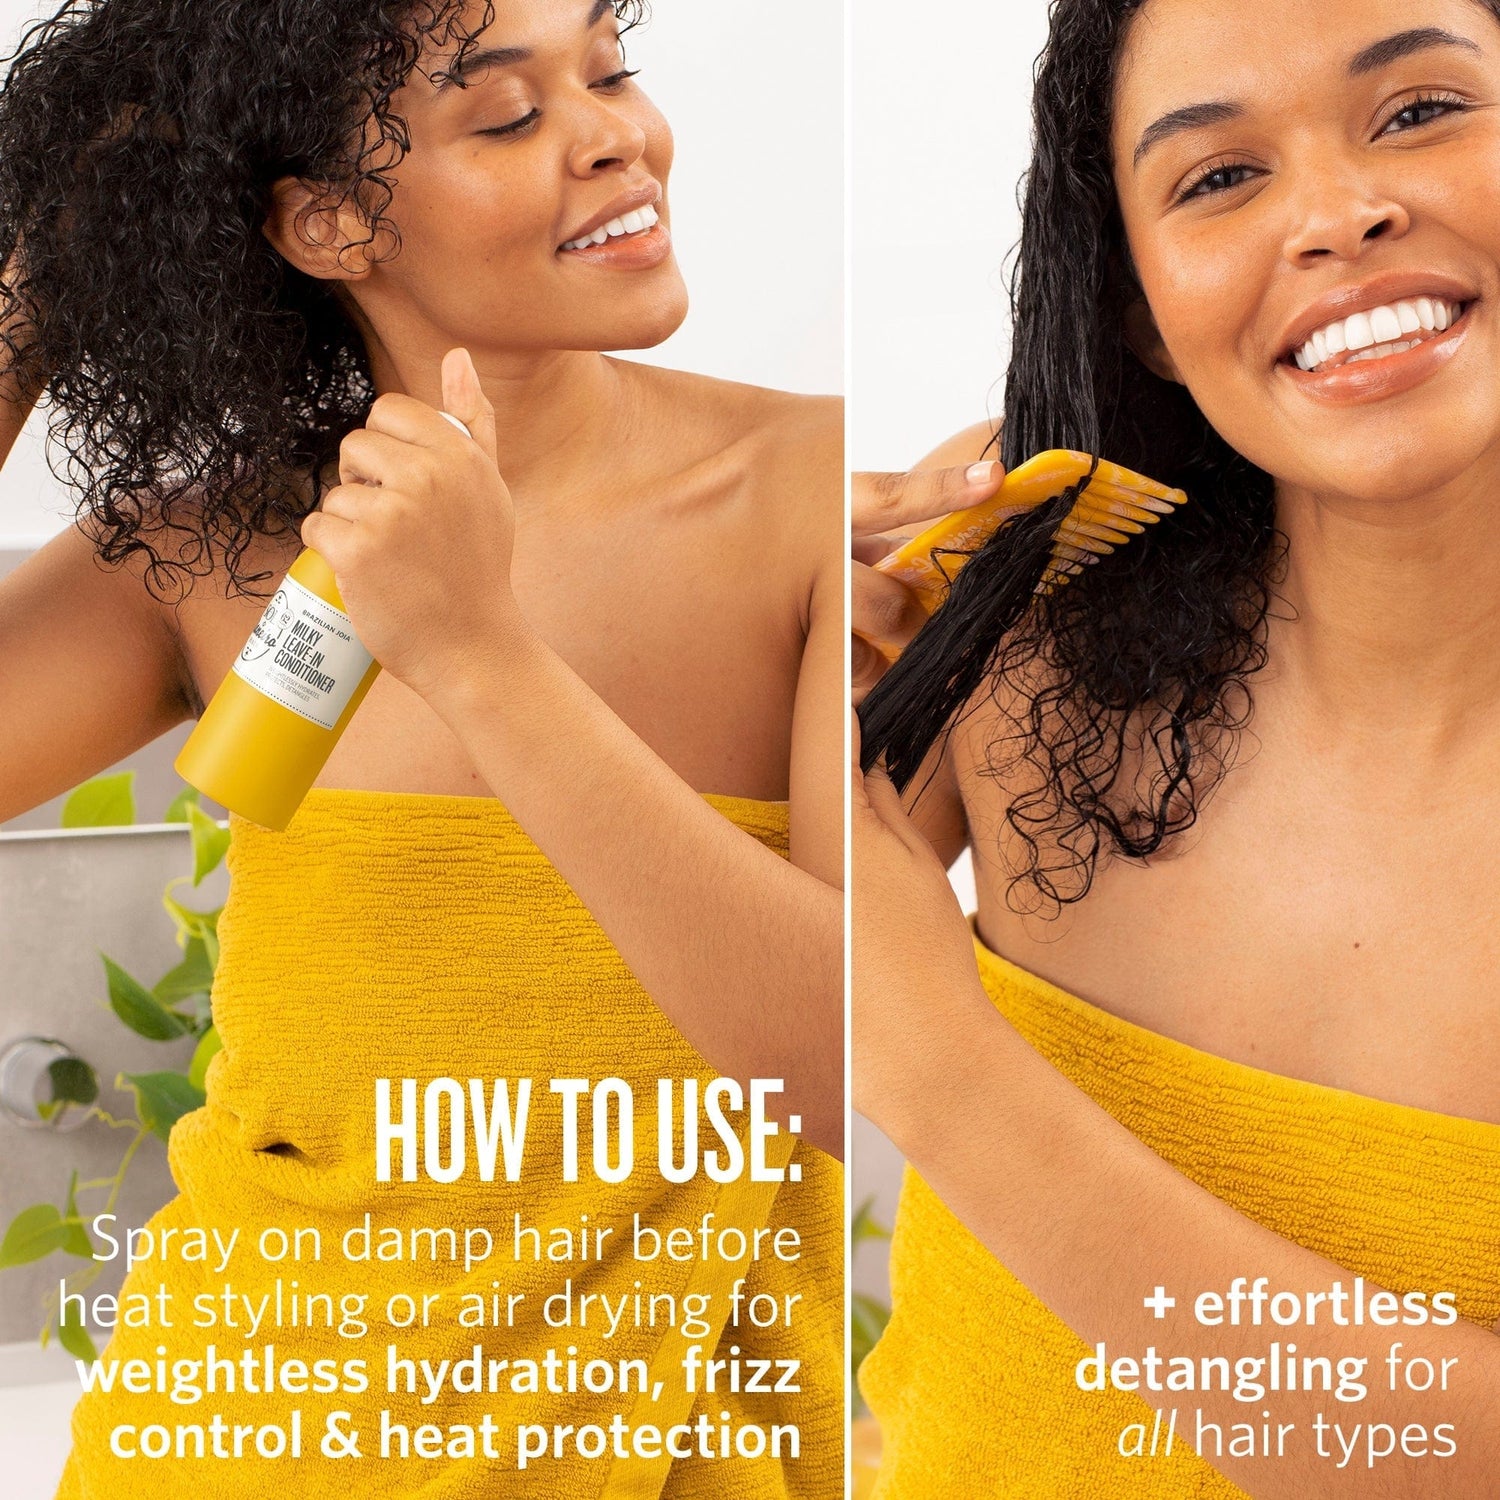 How to use: spray on damp hair before heat styling or air drying for weightless hydration, frizz control and heat protection + effortless detangling for all hair types